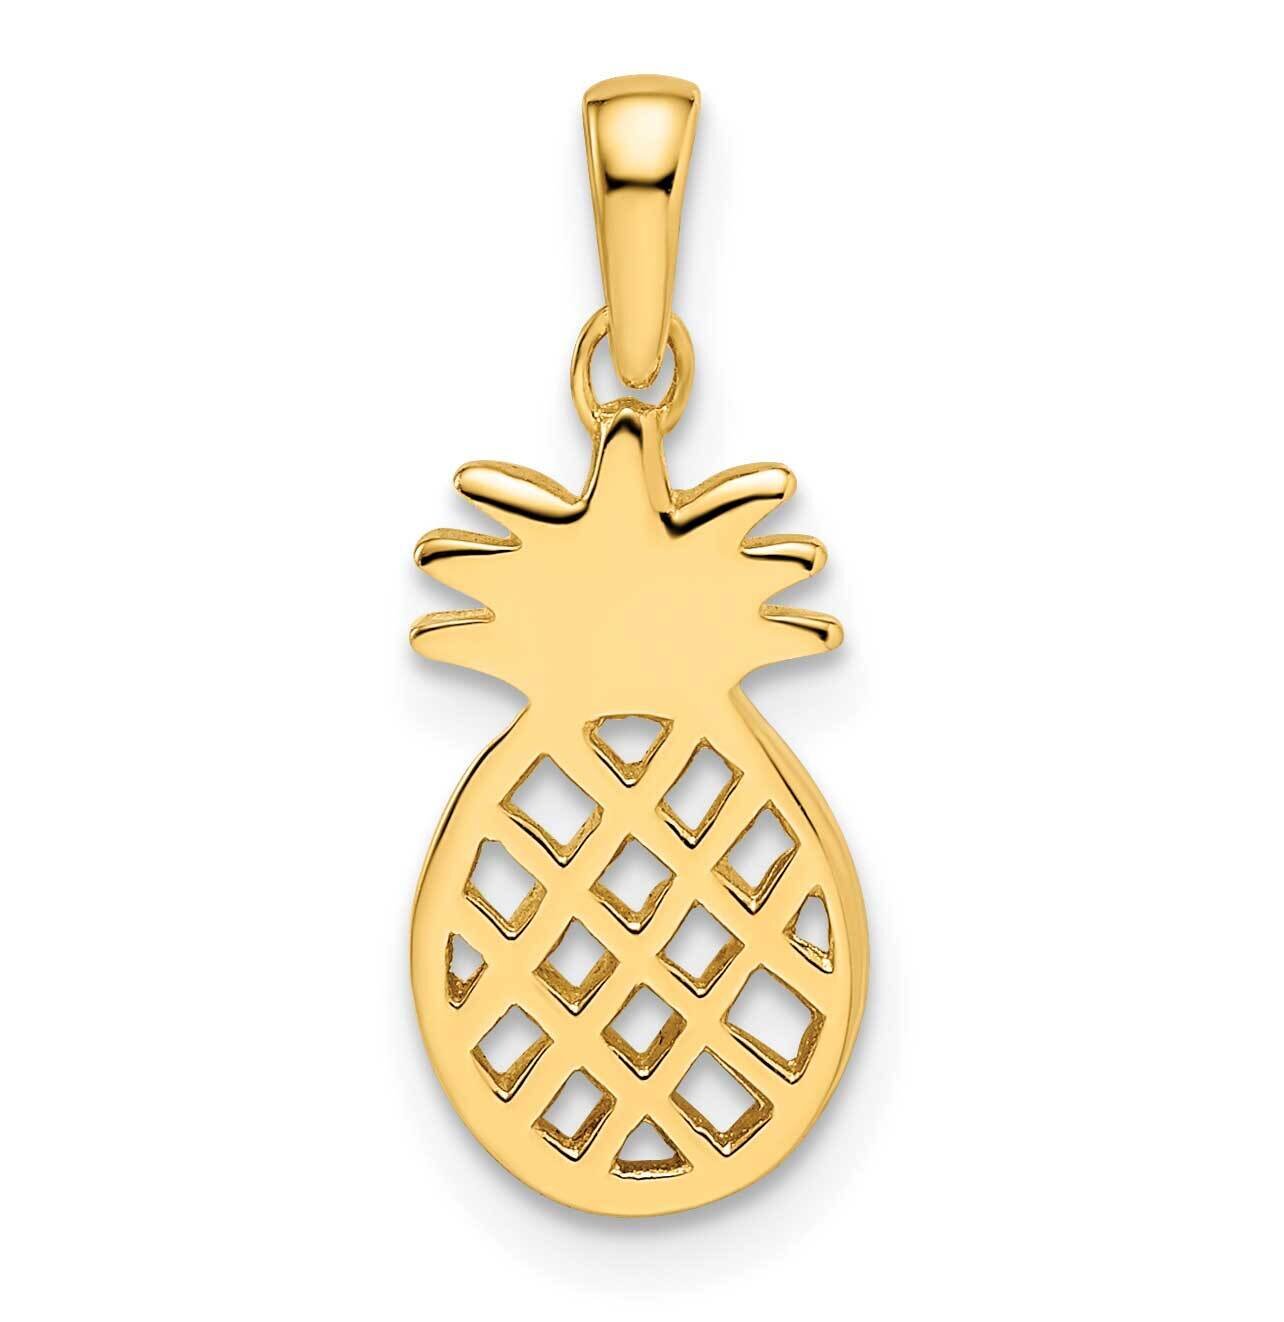 Pineapple Pendant Sterling Silver Gold-Plated QP5519